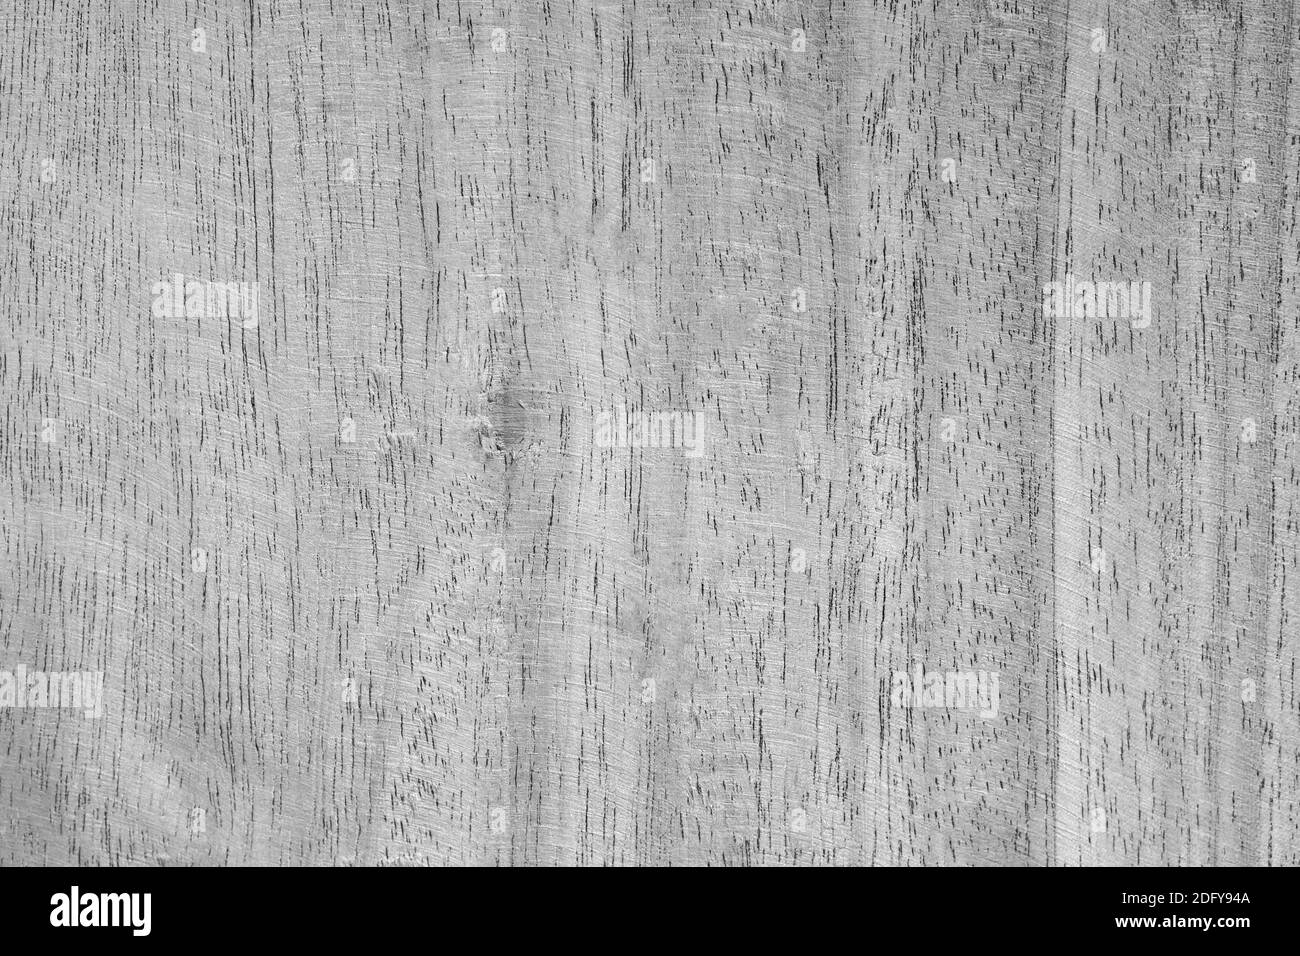 Top view of vintage black and white wooden wall texture background Stock Photo